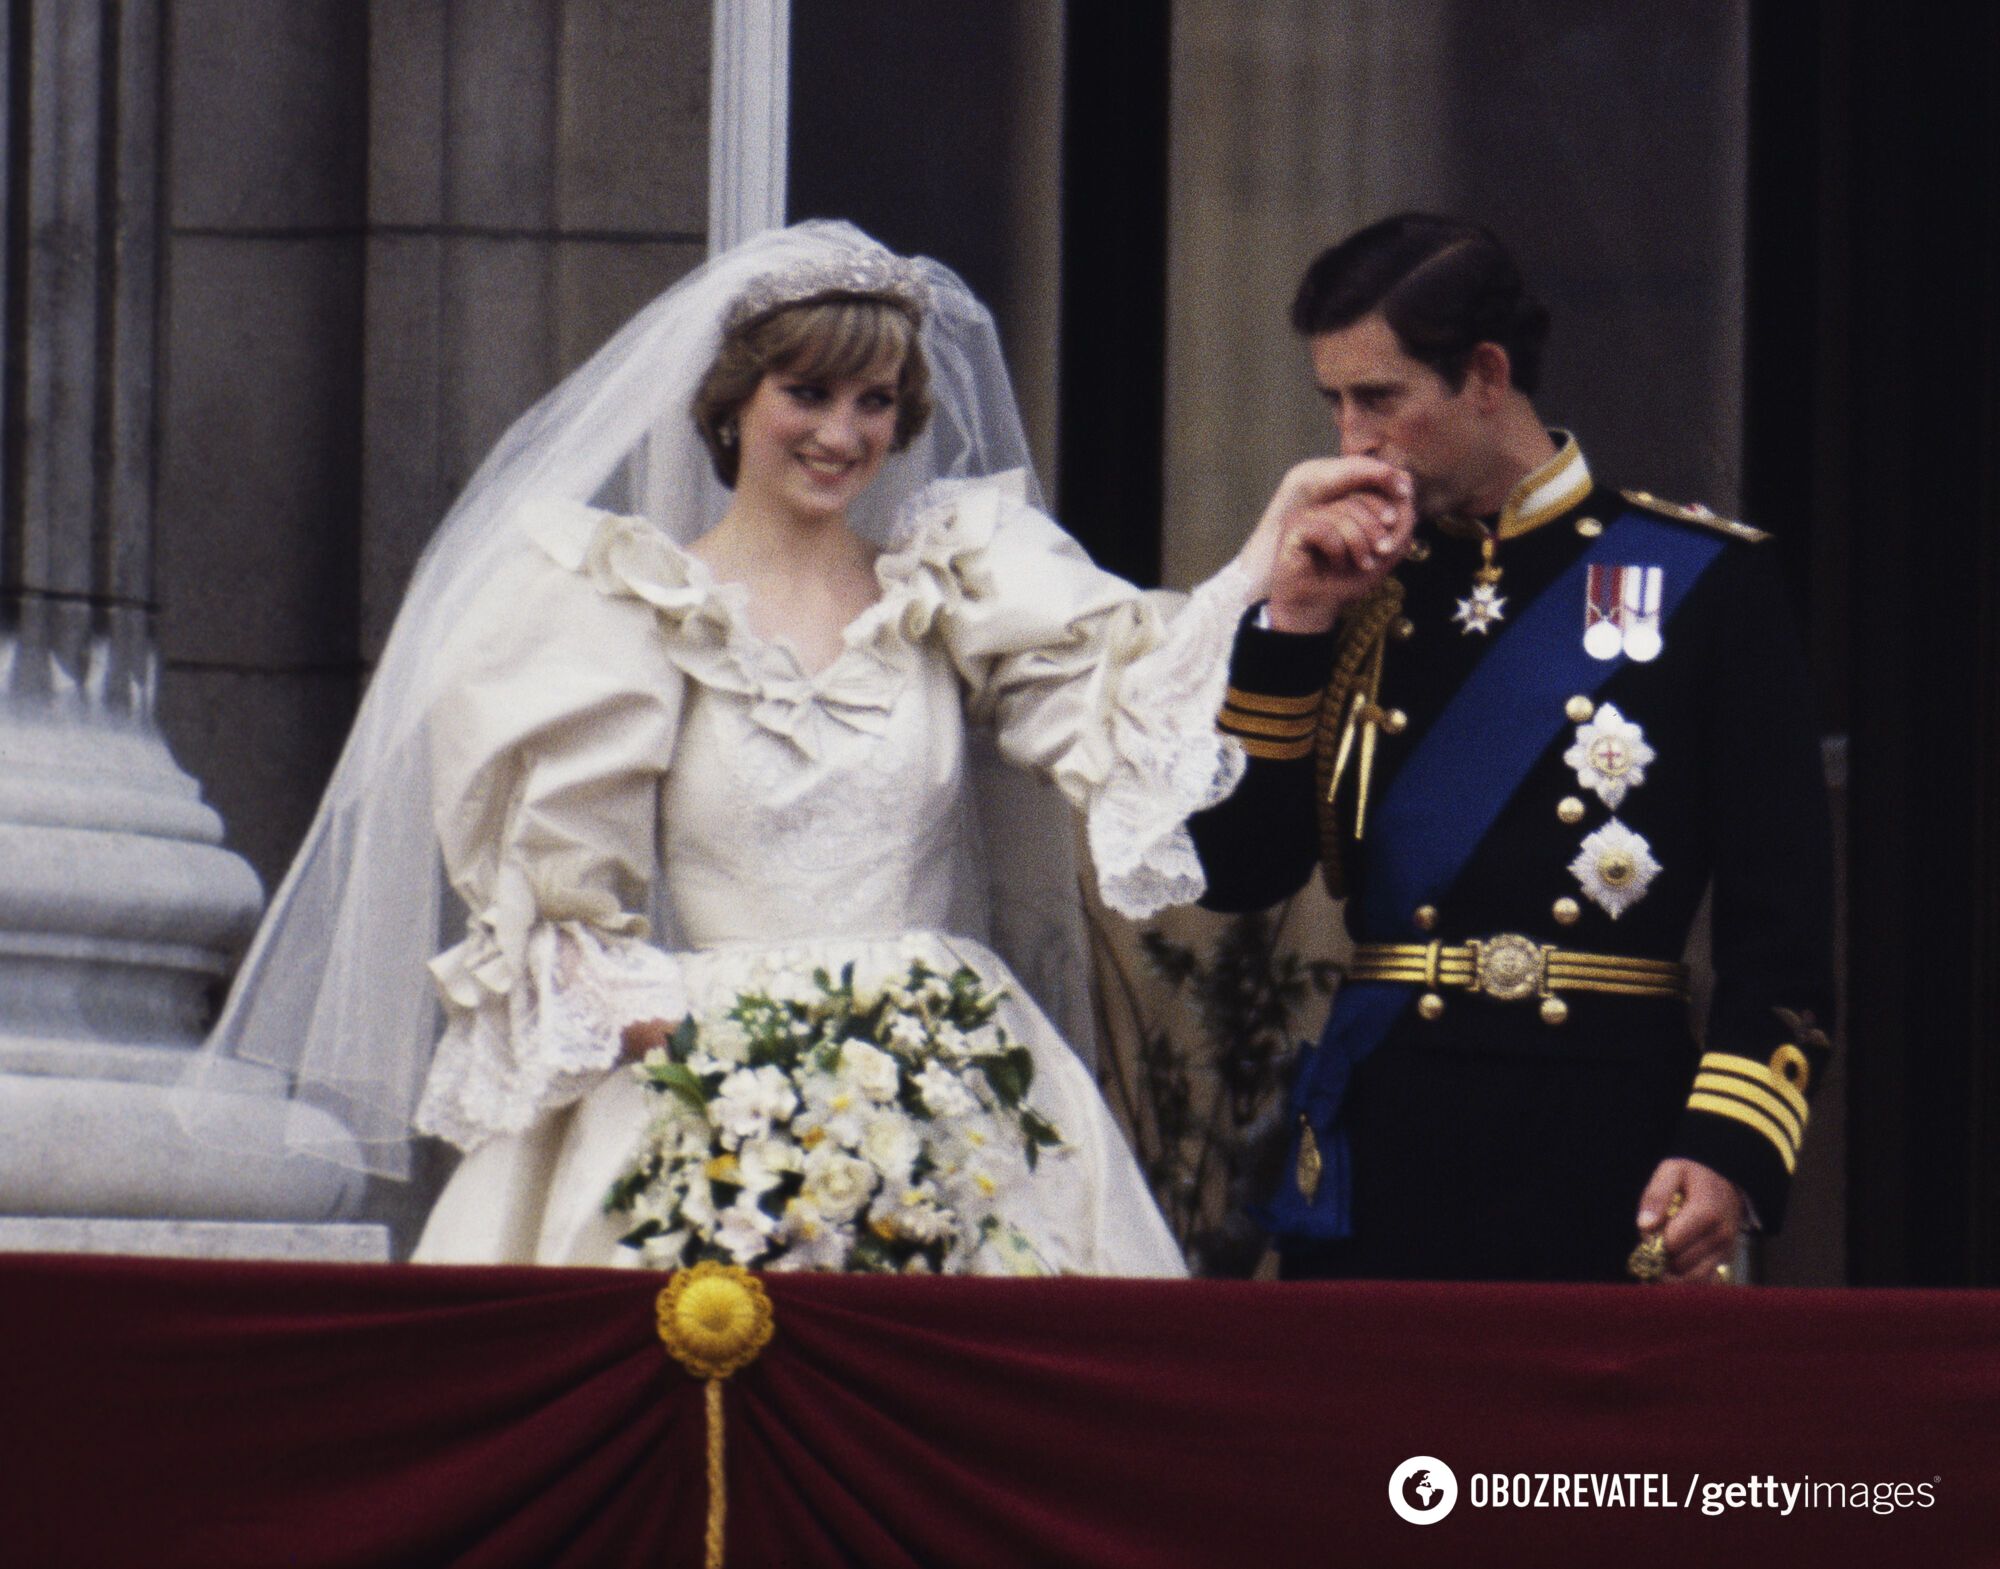 A ring that was too small, a split tiara, and more: 5 troubles that happened at royal weddings